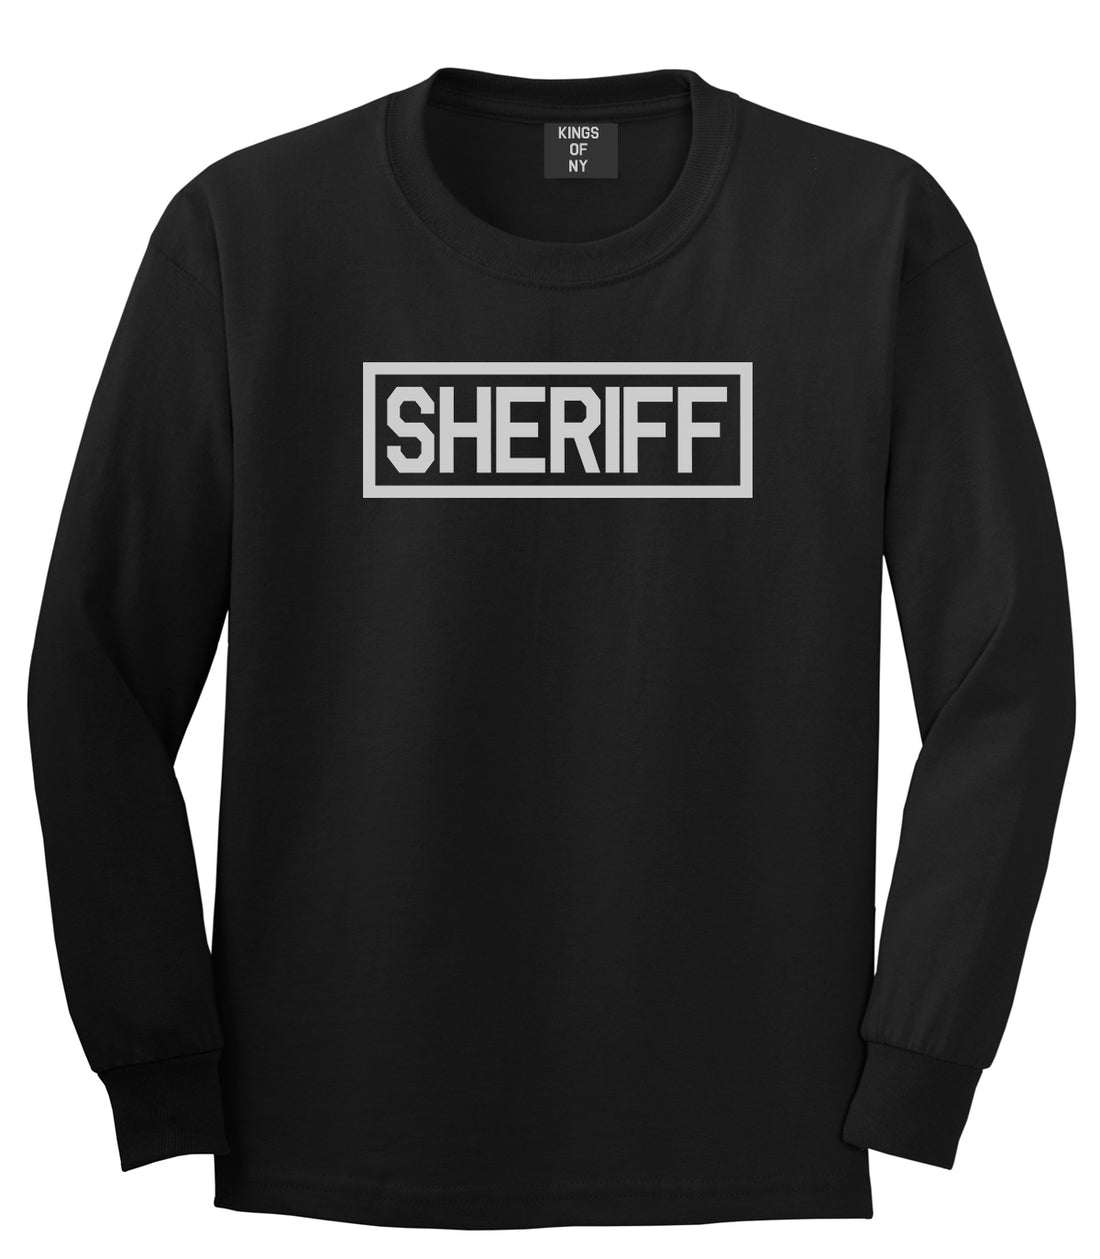 Sheriff County Police Mens Black Long Sleeve T-Shirt by Kings Of NY